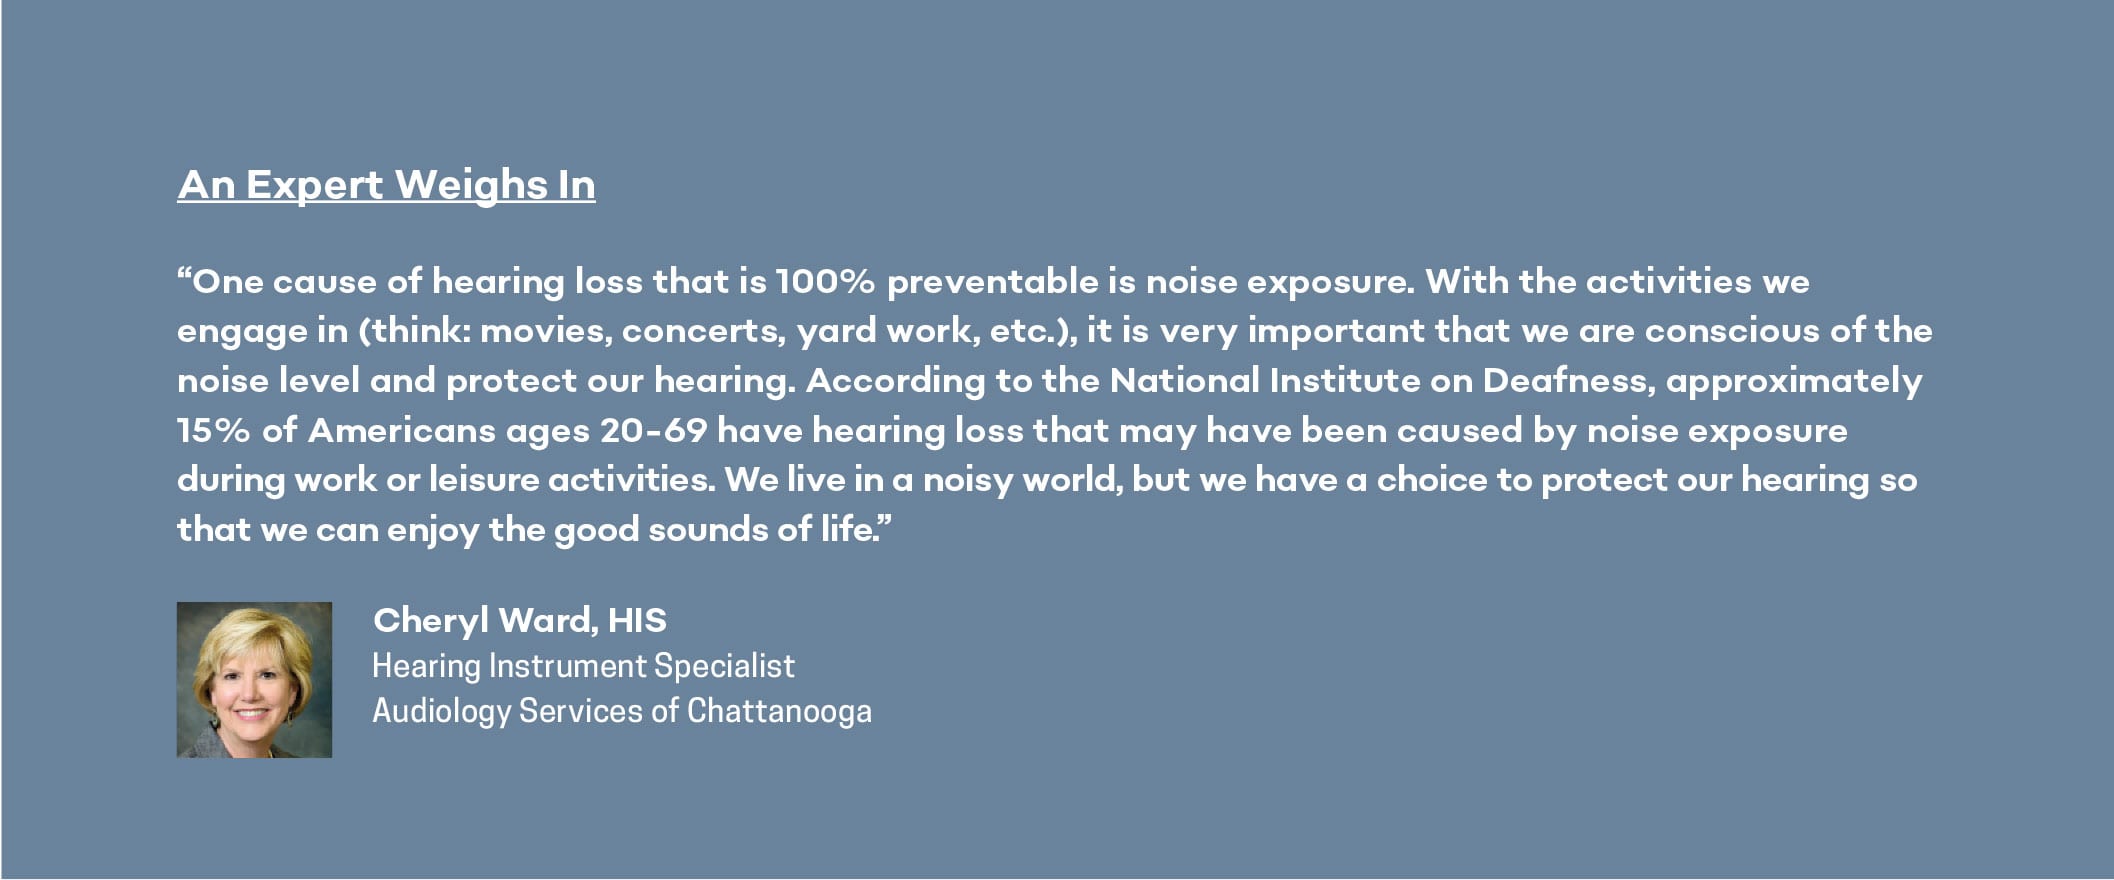 Aging Well Hearing Loss and Your Health Cheryl Ward HIS Hearing Instrument Specialist Audiology Services of Chattanooga